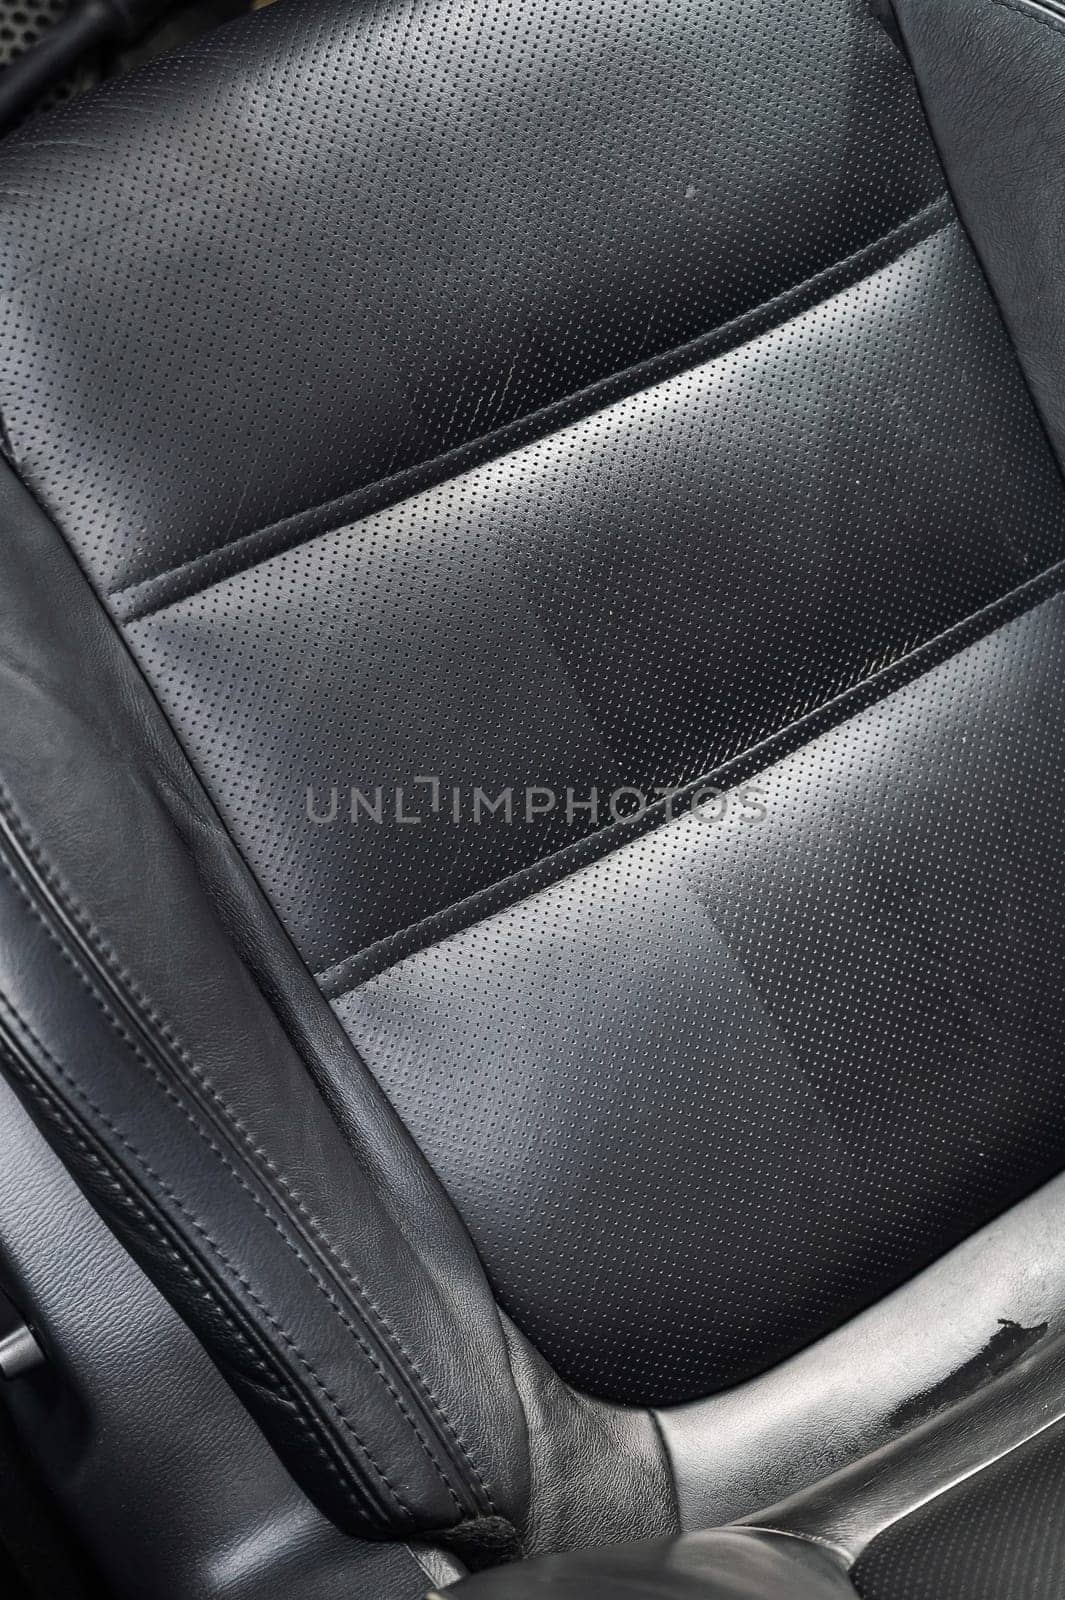 Close-up of black leather car seats